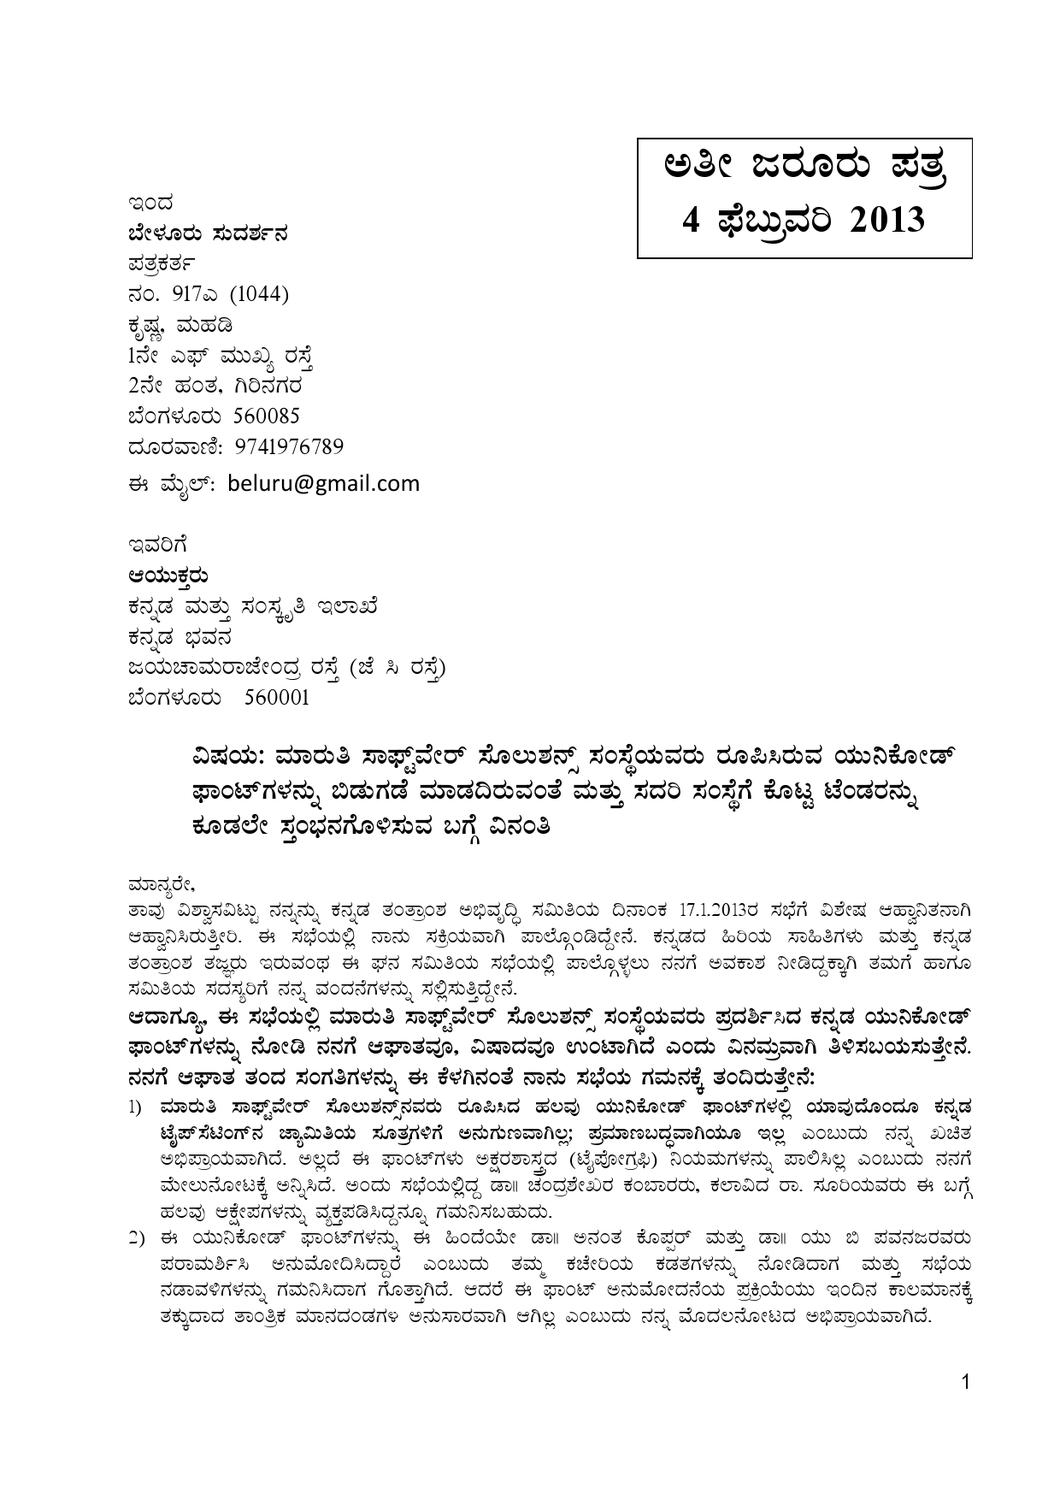 Letter To Commissioner Kannada And Culture Goki On Unicode Intended For Dimensions 1060 X 1500 